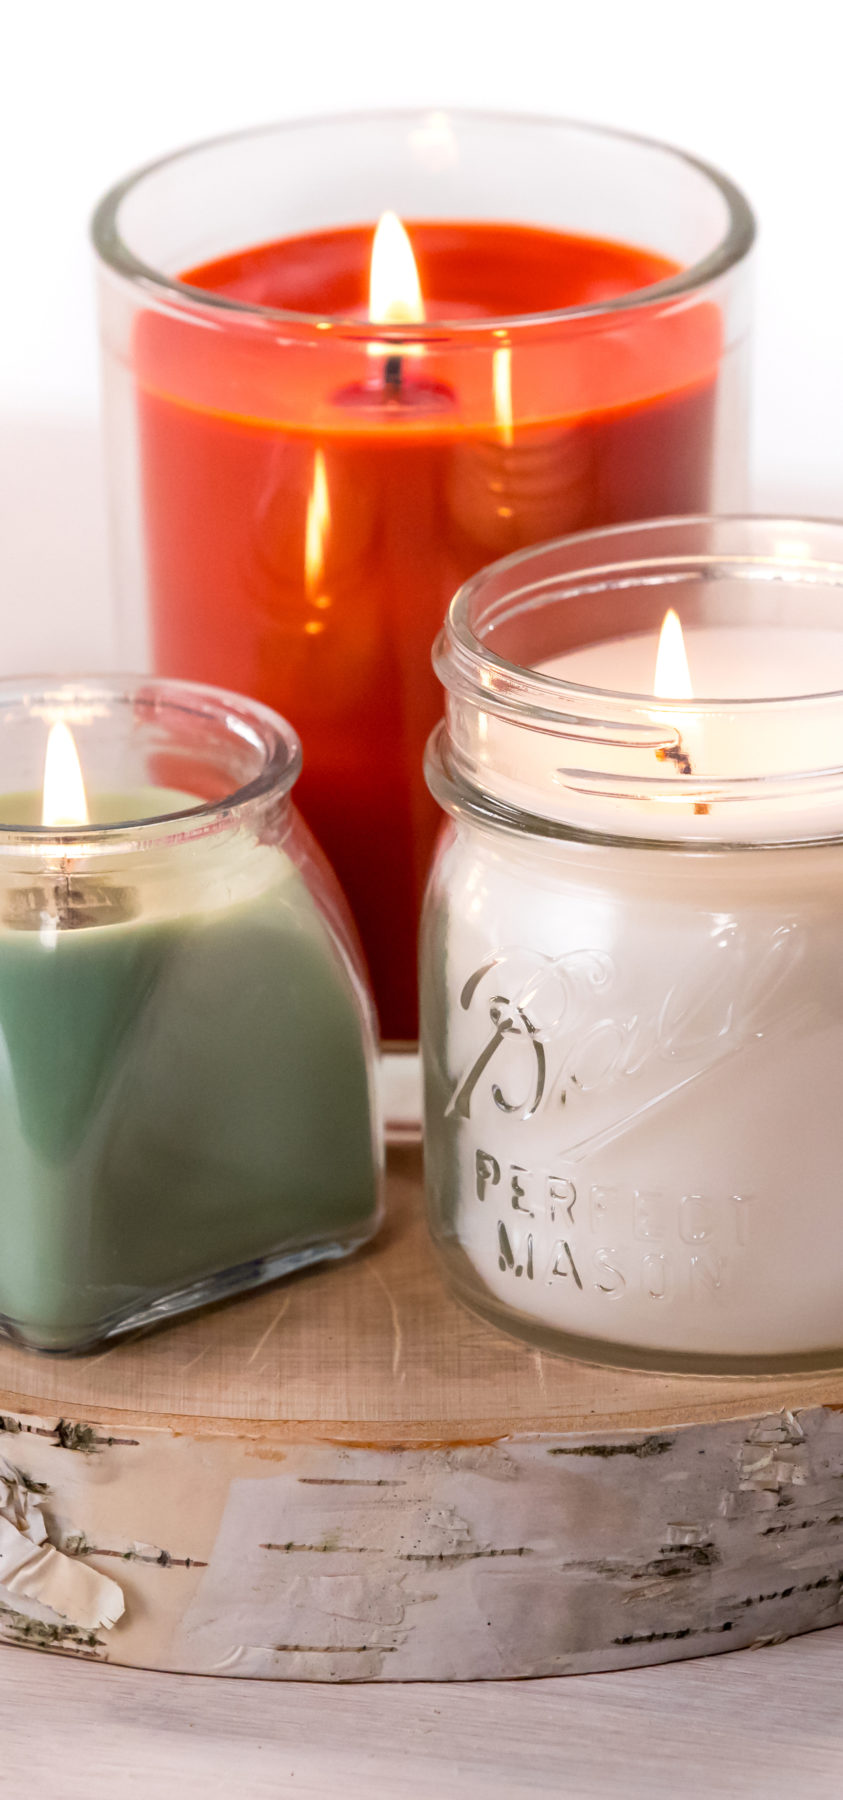 Enjoy the glow from your fragrant homemade candle!